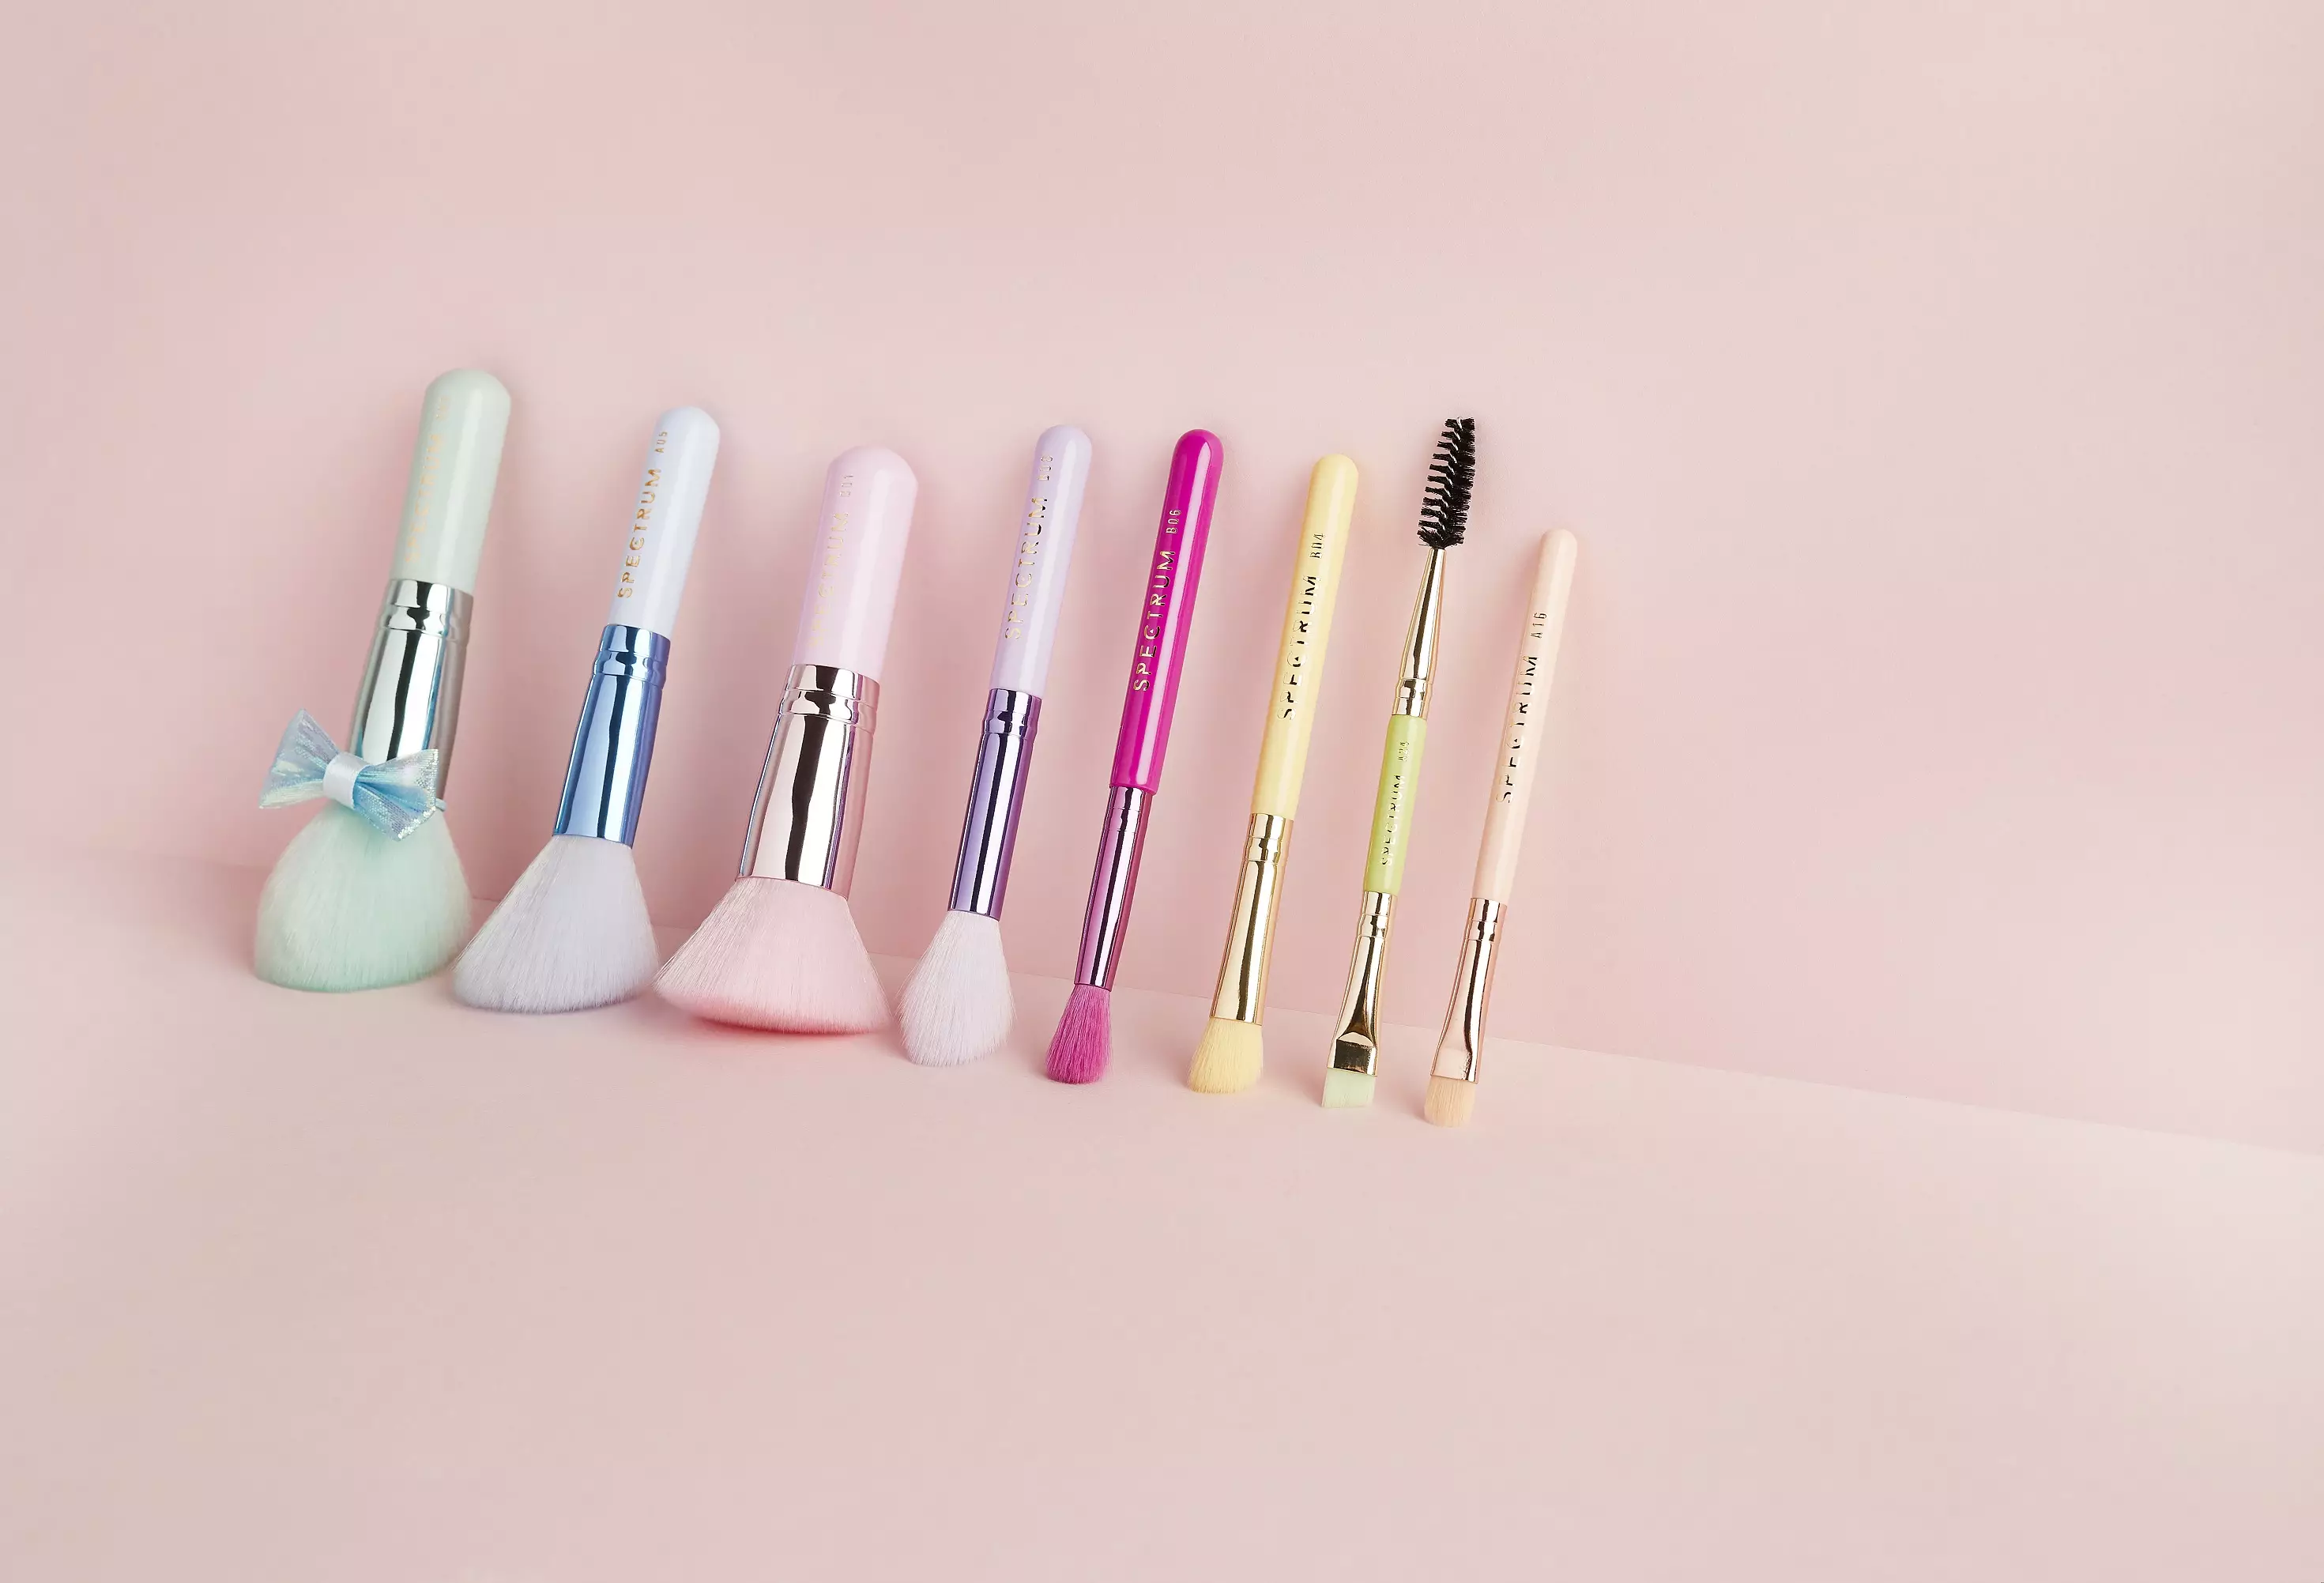 The travel-sized brushes are perfect for staycations, holidays or when you're on-the-go! (